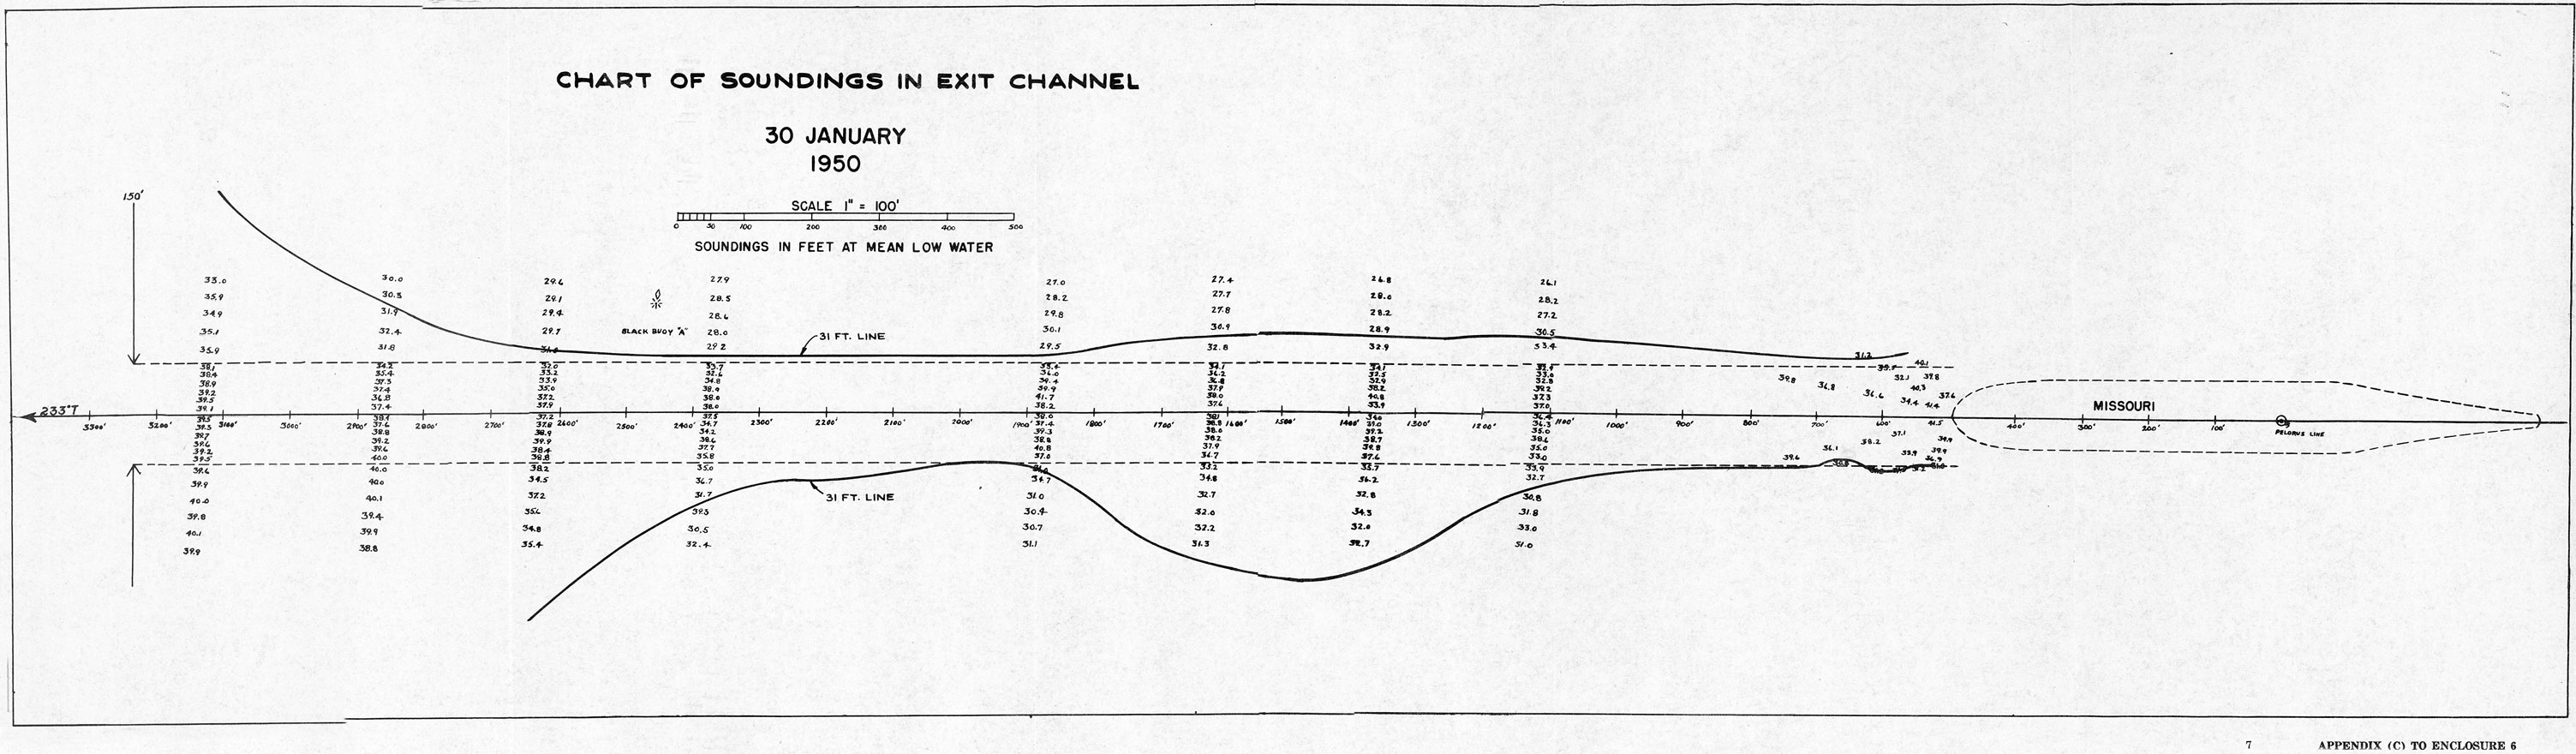 
Page 7.
Chart of Soundings in Exit Channel
30 January 1950
7 Appending (C) To Enclosure 6